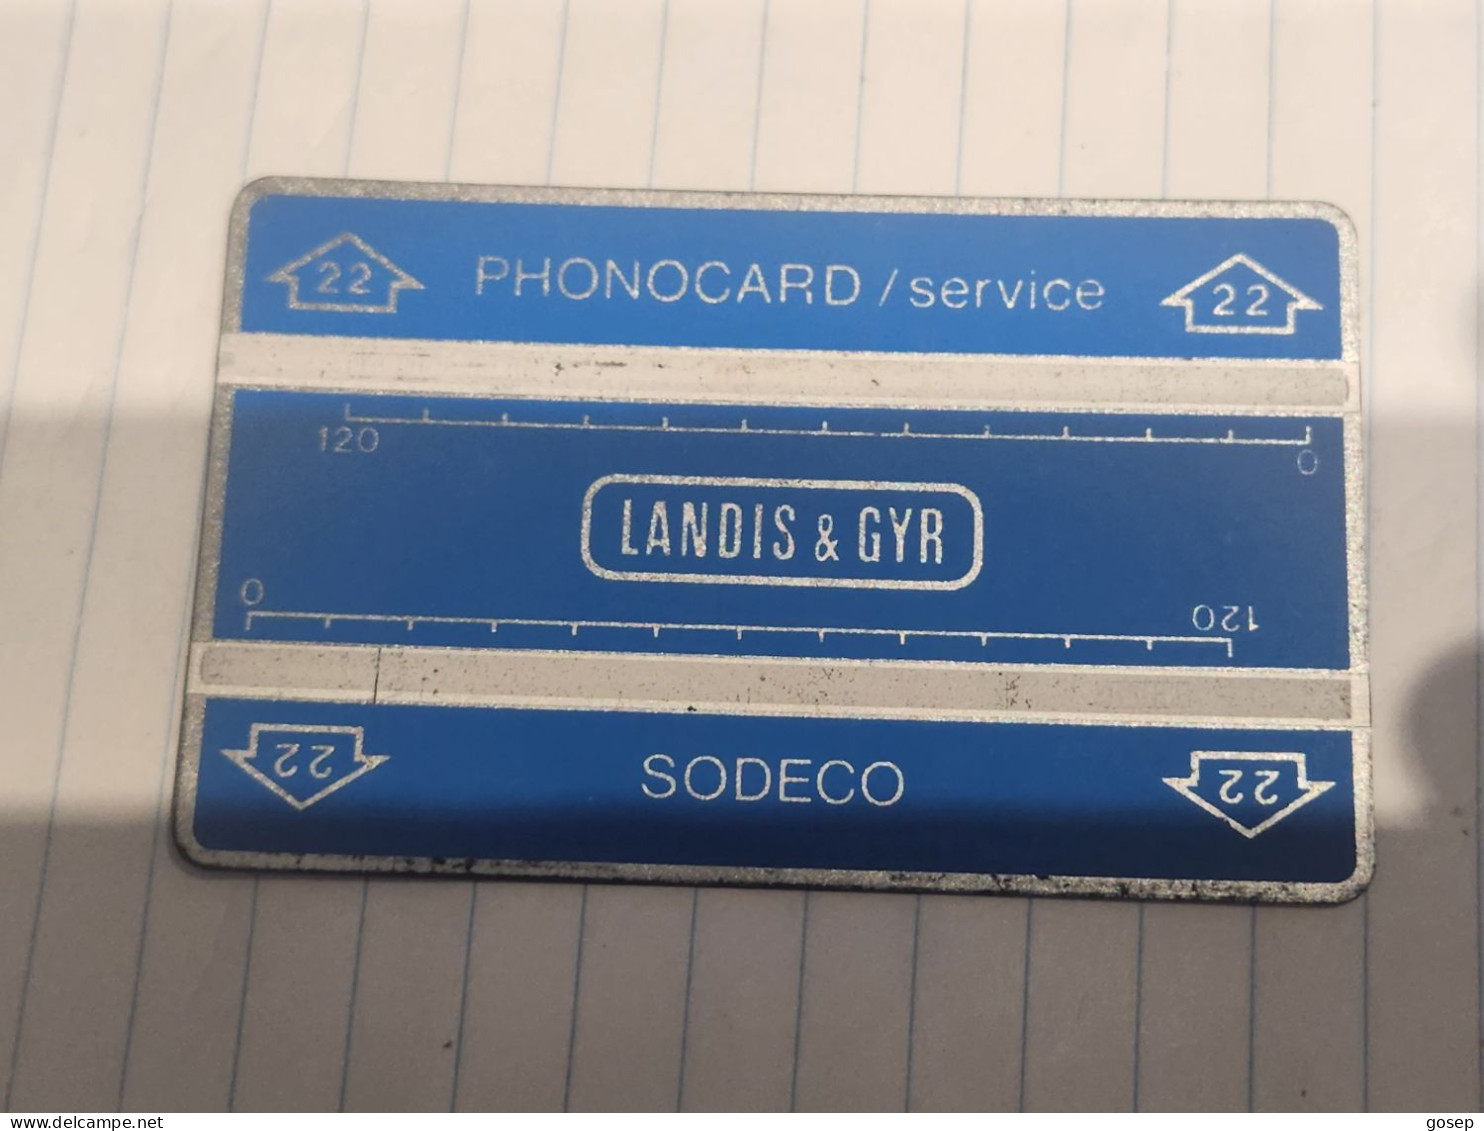 ISRAEL-(BZ-6)Rare Card-service-WITHOUT A NOTCH-(SODECO)(9)(805S06820)(120×2units)-USED CARD+5card Prepiad Free - Israel